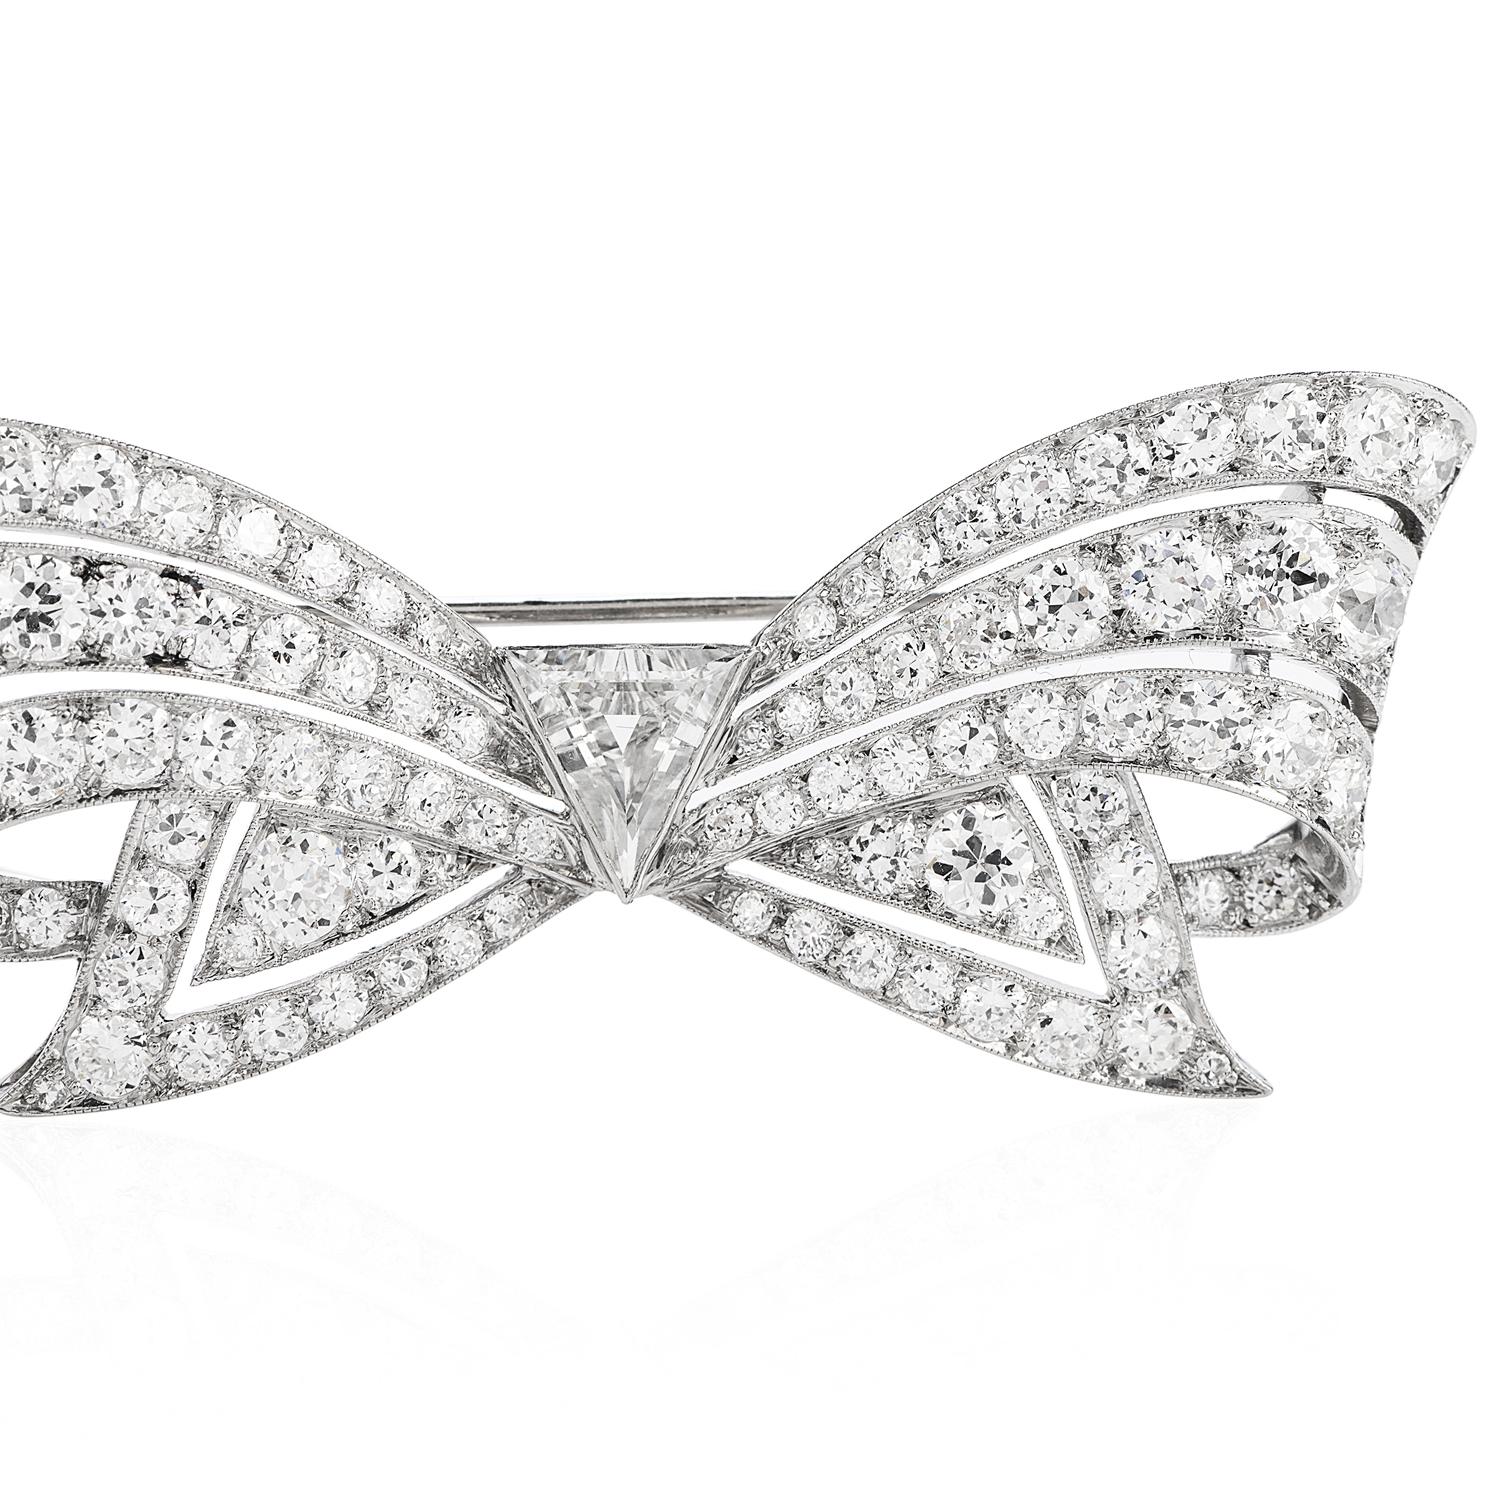 This stunning Antique 1930's diamond brooch Pin handcrafted in Platinum. This sparkling brooch pin features a bow design centered with a triangular natural diamond weighing approx. (0.85, H-I color and VS clarity) bezel-set. 
It is surrounded